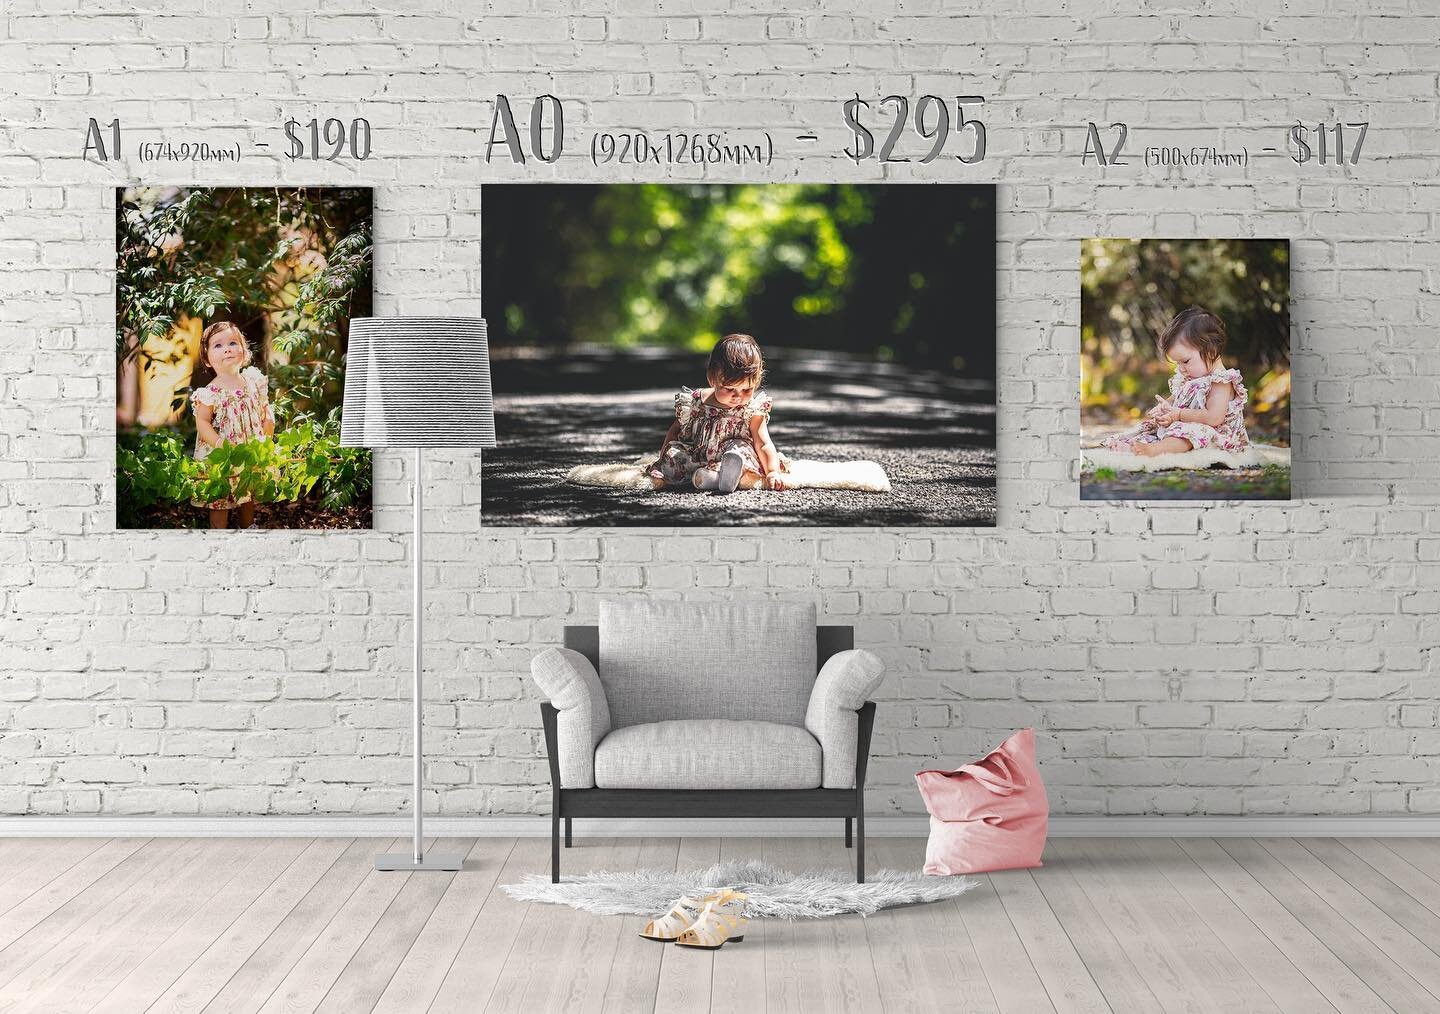 Do you want your own canvas art on your walls at home? Send me files, or let&rsquo;s shoot some new ones - either is cool! 

A3 377x500mm - $85 
A2 500x674mm - $117
A1 674x920mm - $190 
A0 920x1268mm - $295

All sizes include an 80mm wrap. A4 and cus